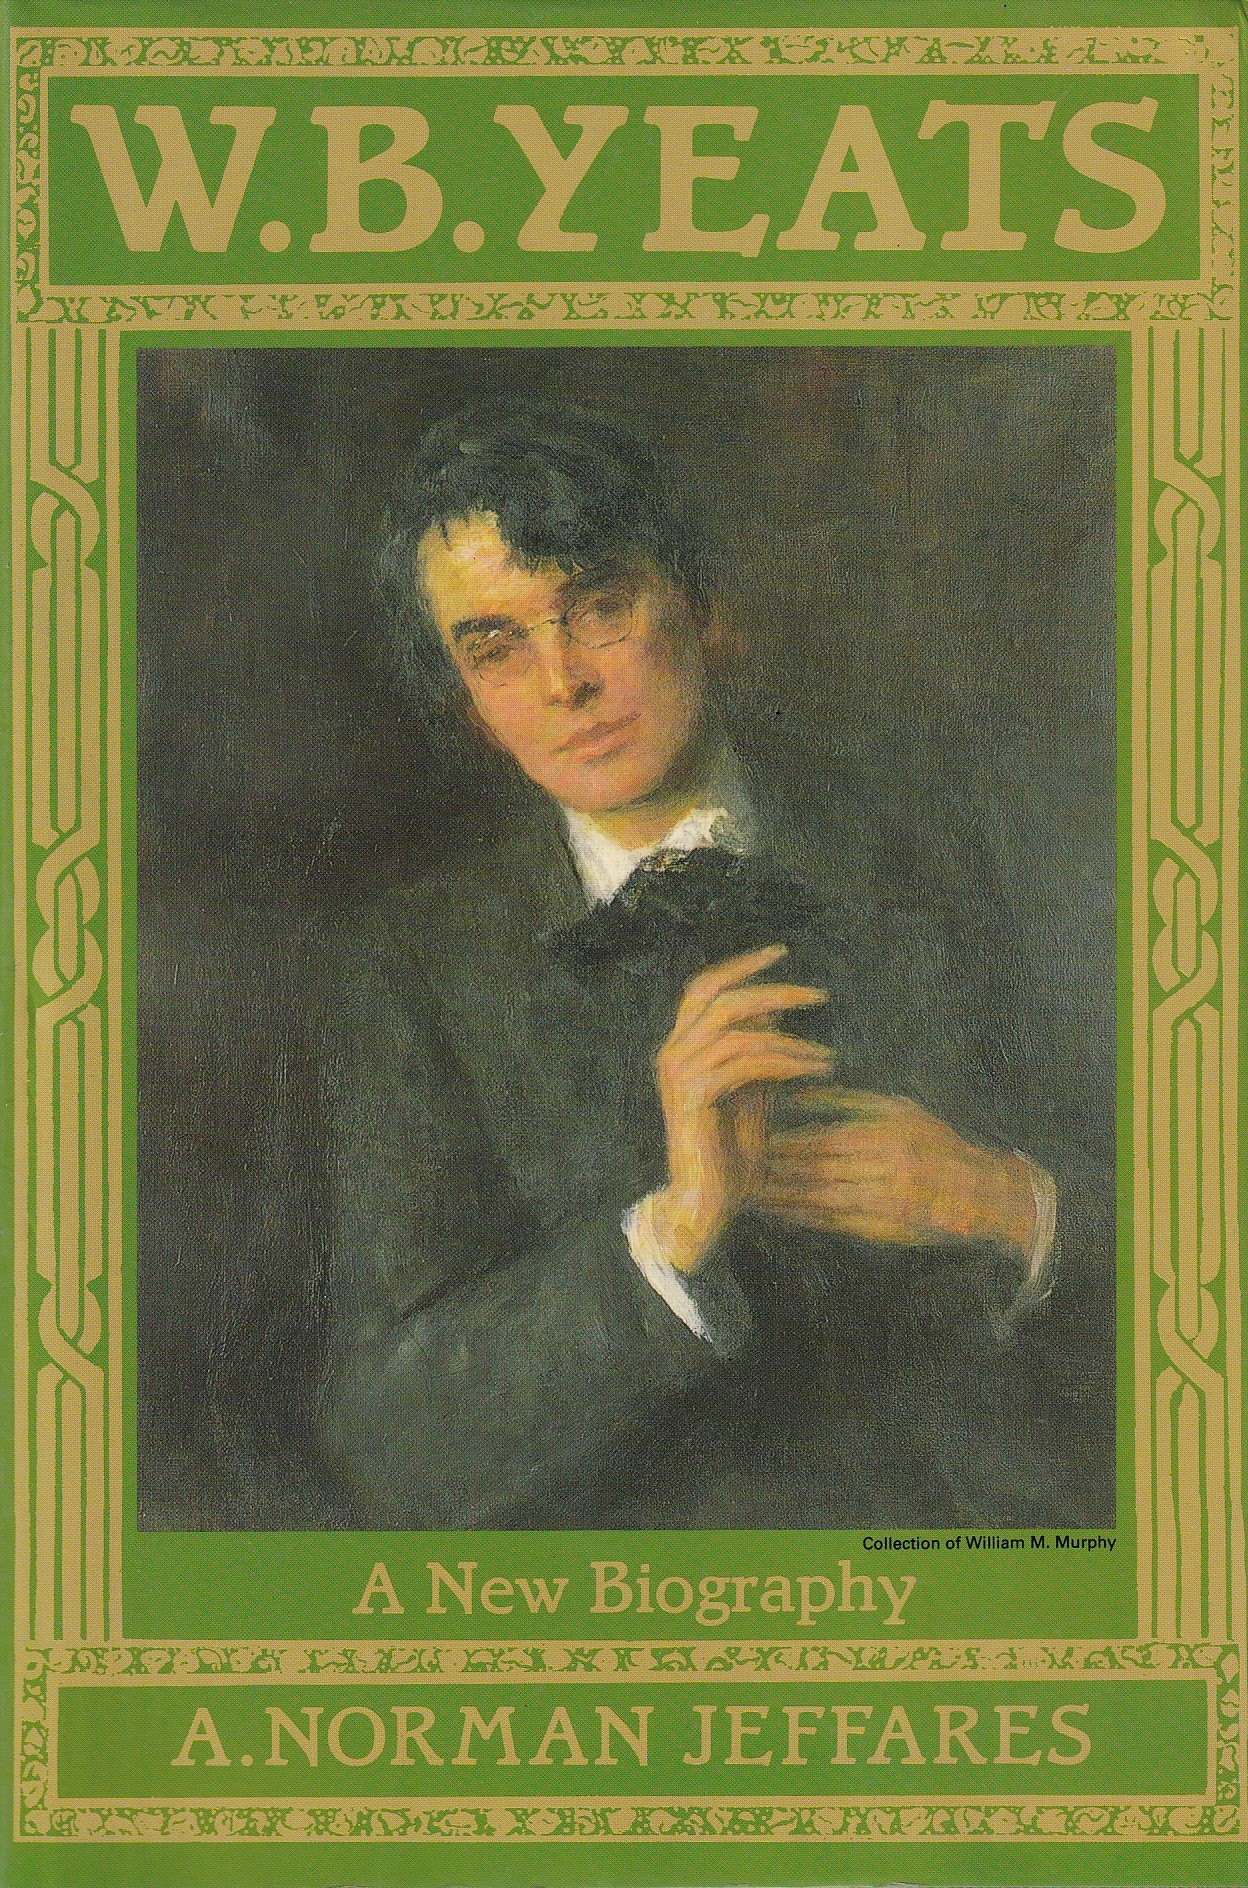 W.B.Yeats: A New Biography by A. Norman Jeffares